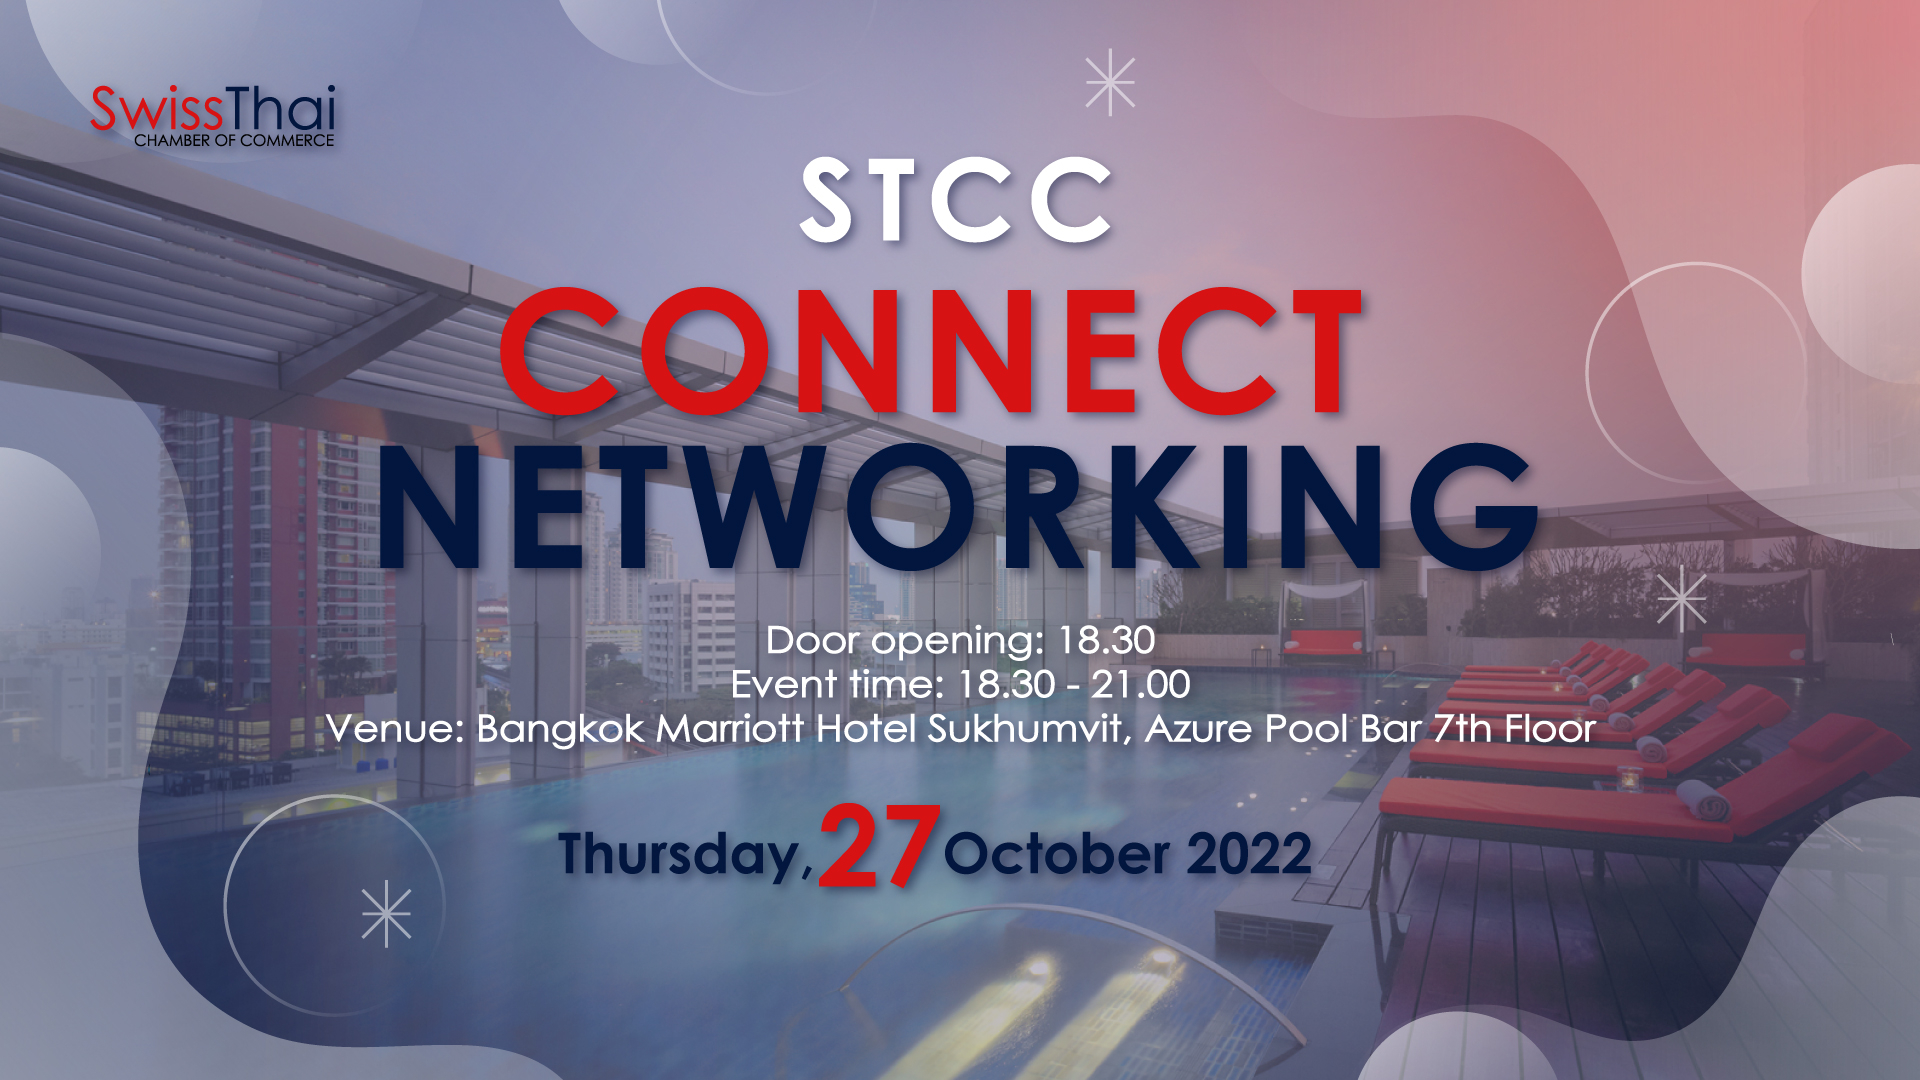 thumbnails STCC Connect Networking - 27 October 2022